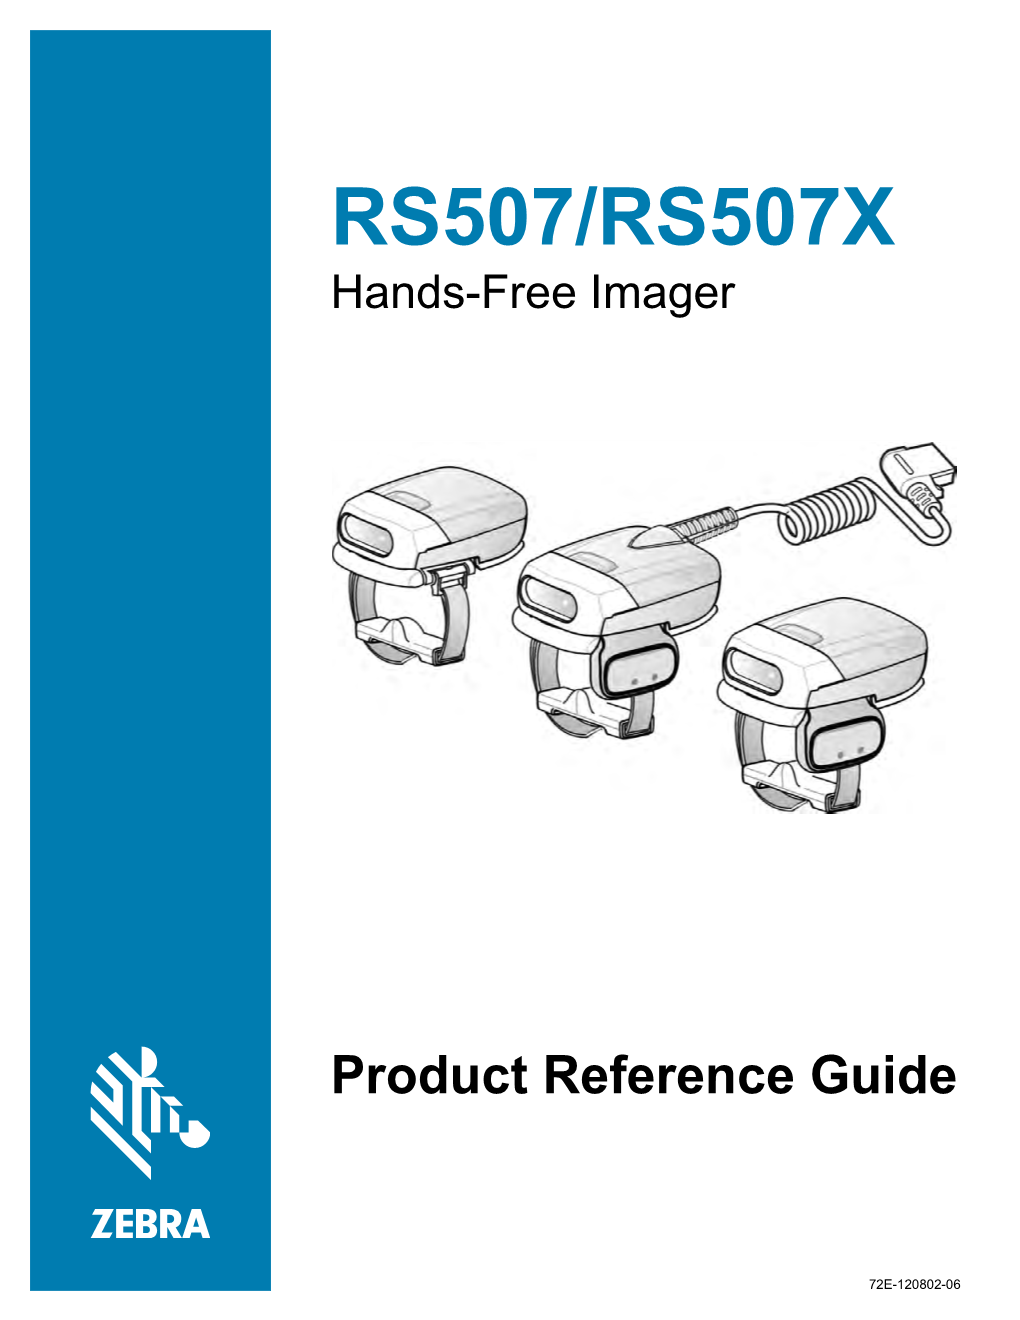 RS507/RS507X Product Reference Guide (En)